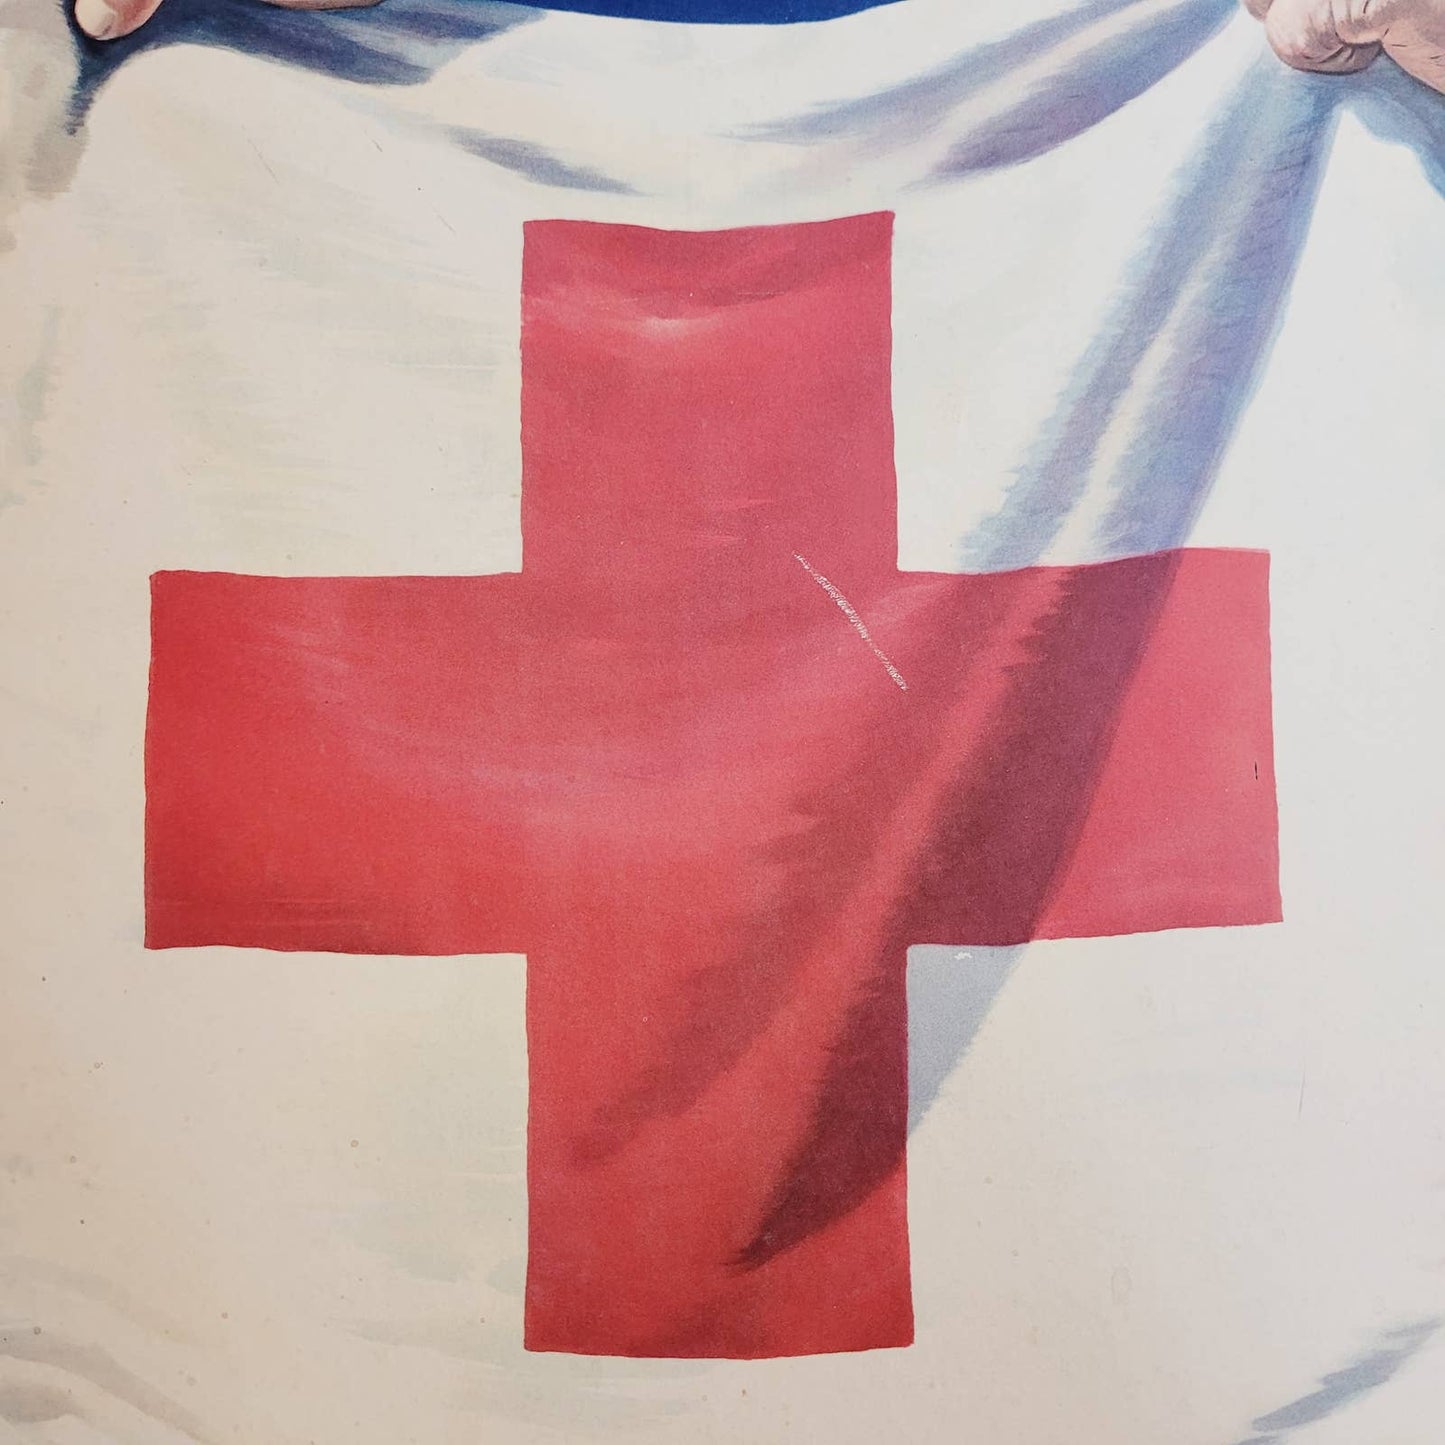 1950 WWII All May Help! Red Cross War Fund Poster Original